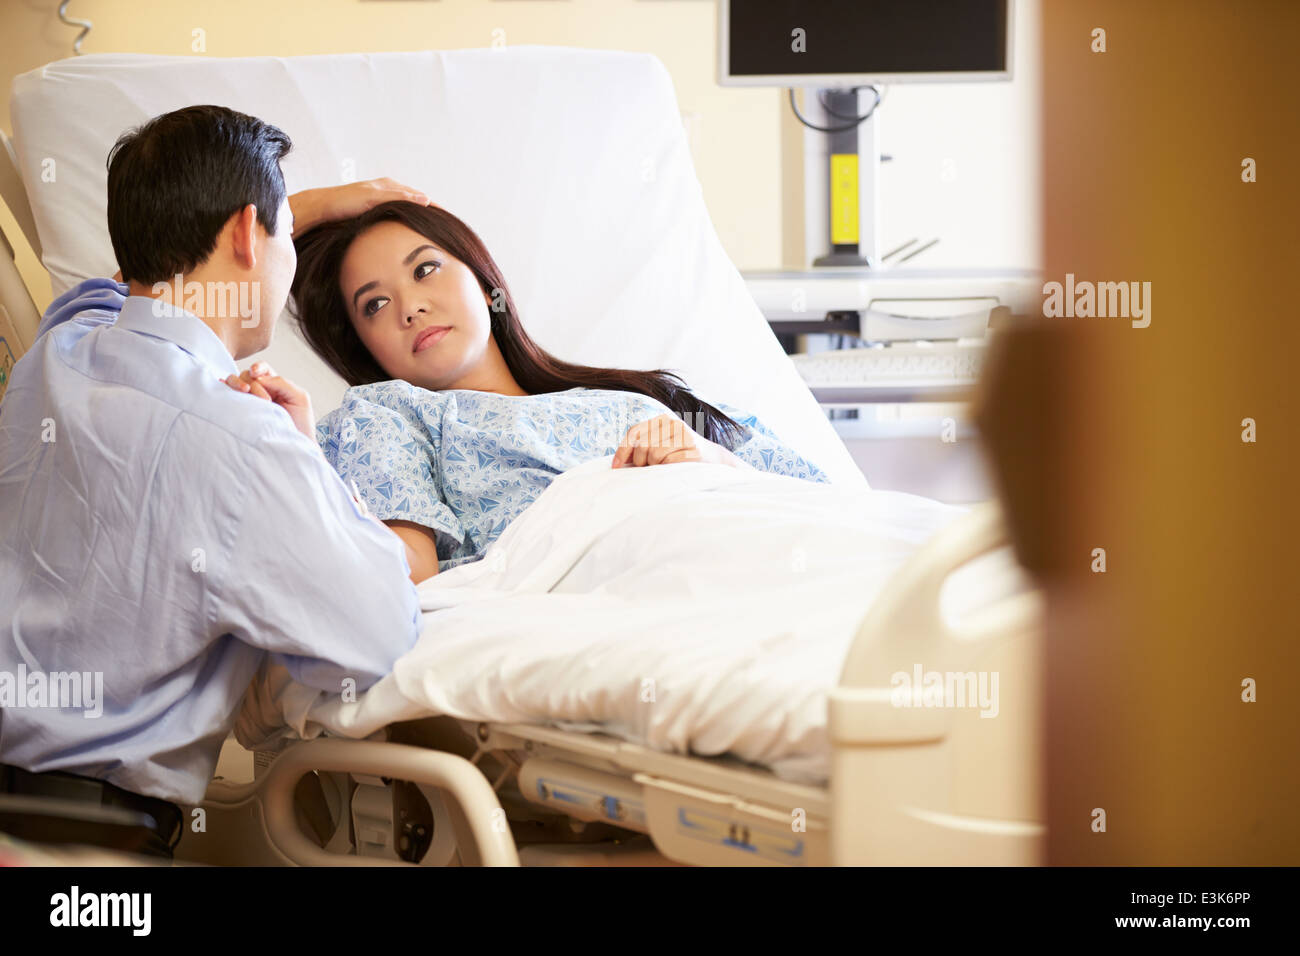 Husband Visiting Wife In Hospital Stock Photo